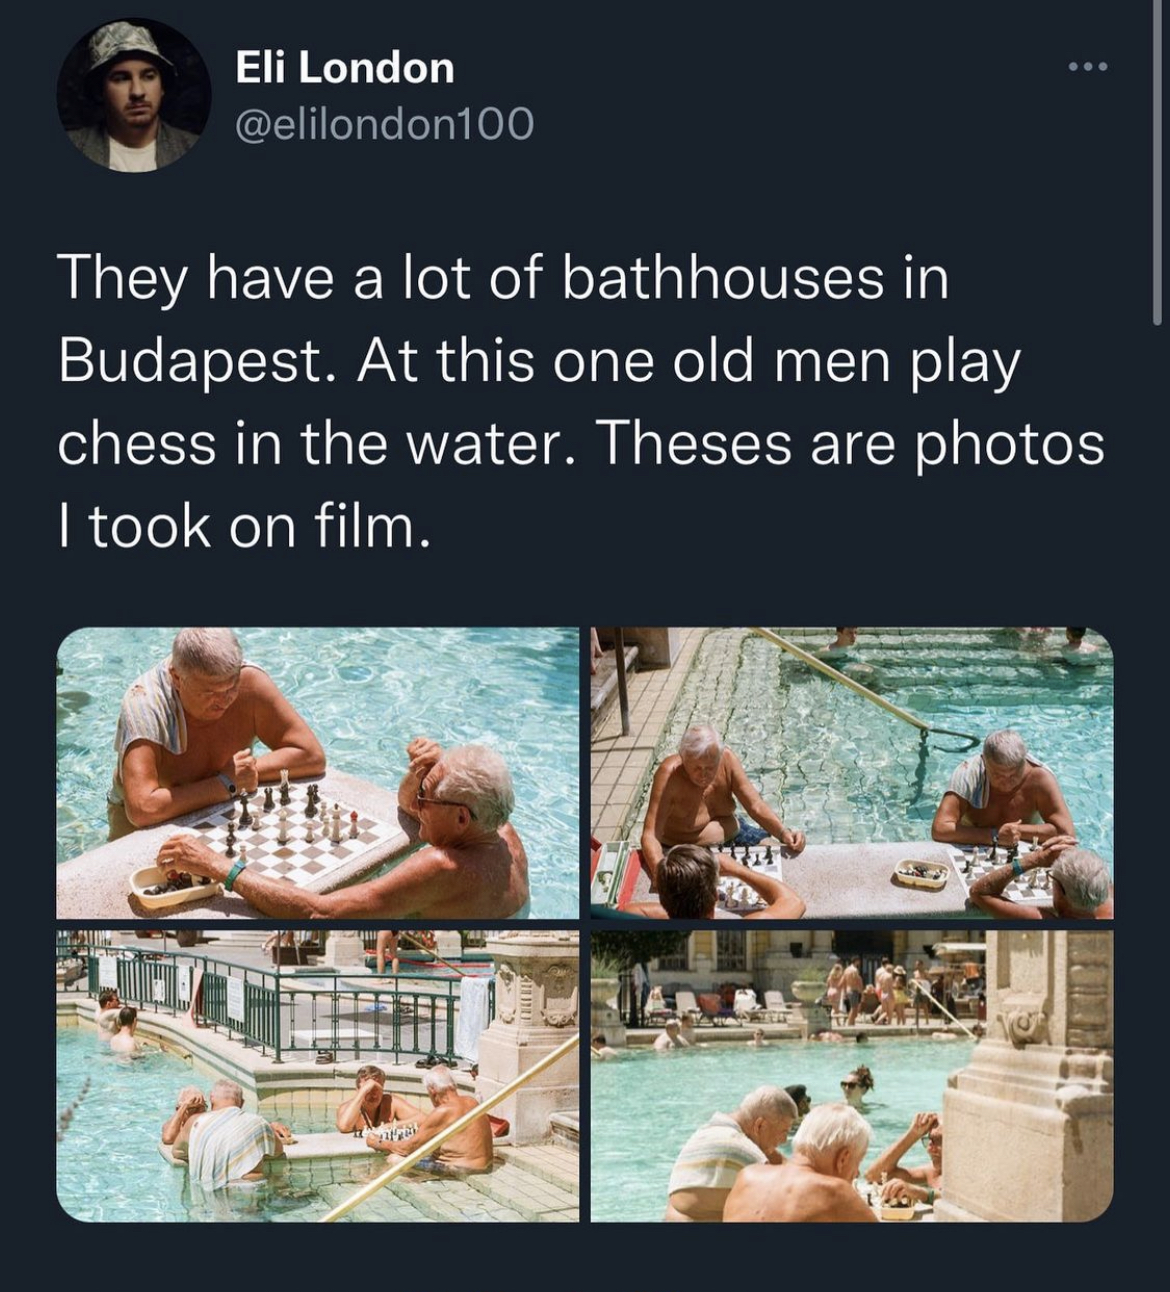 Dudes posting their wins - media - Eli London They have a lot of bathhoses in Budapest. At this one old men play chess in the water. Theses are photos I took on film.